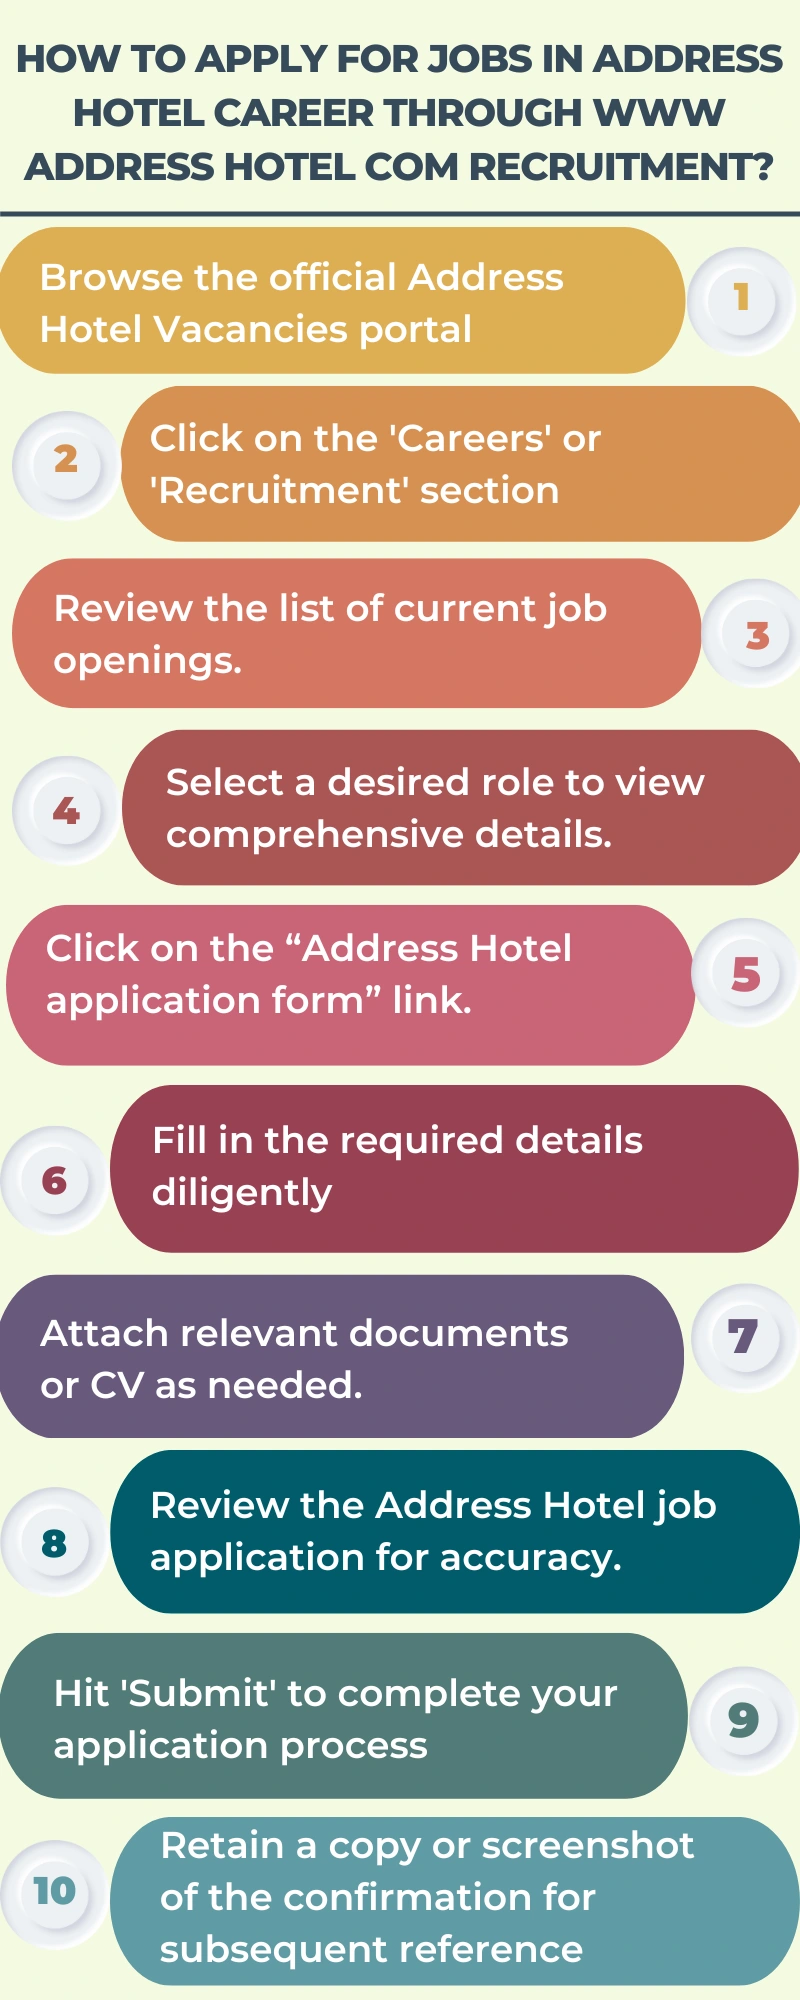 How to Apply for Jobs in Address Hotel Career through www Address Hotel com recruitment?